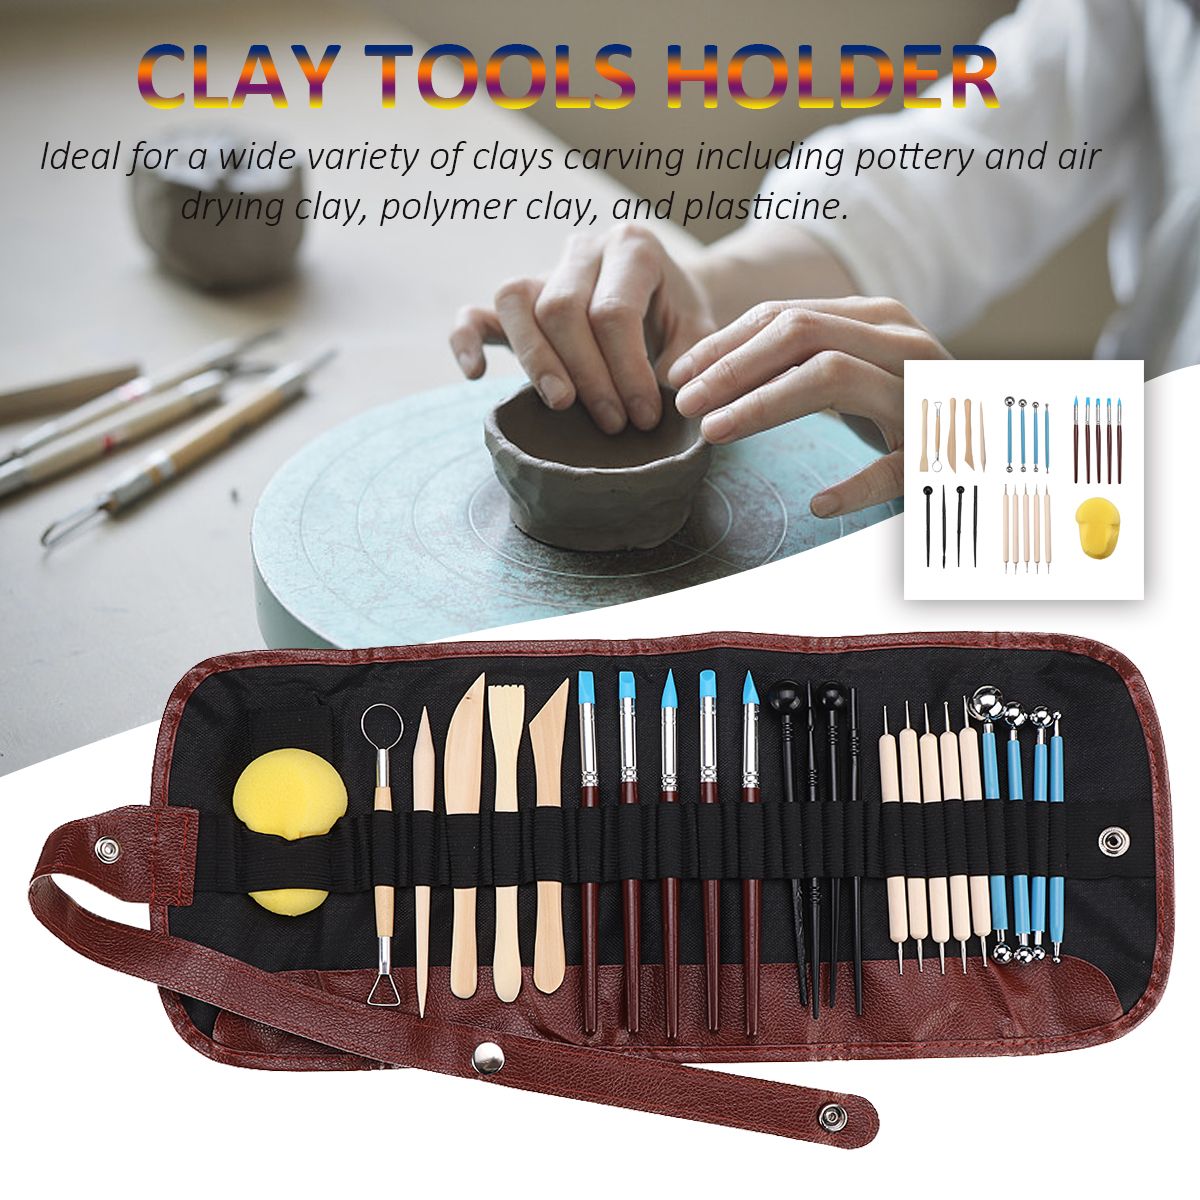 24pcs-Clay-Carving-Pottery-Tools-Polymer-Modeling-DIY-Sculpture-Craft-Holder-1691604